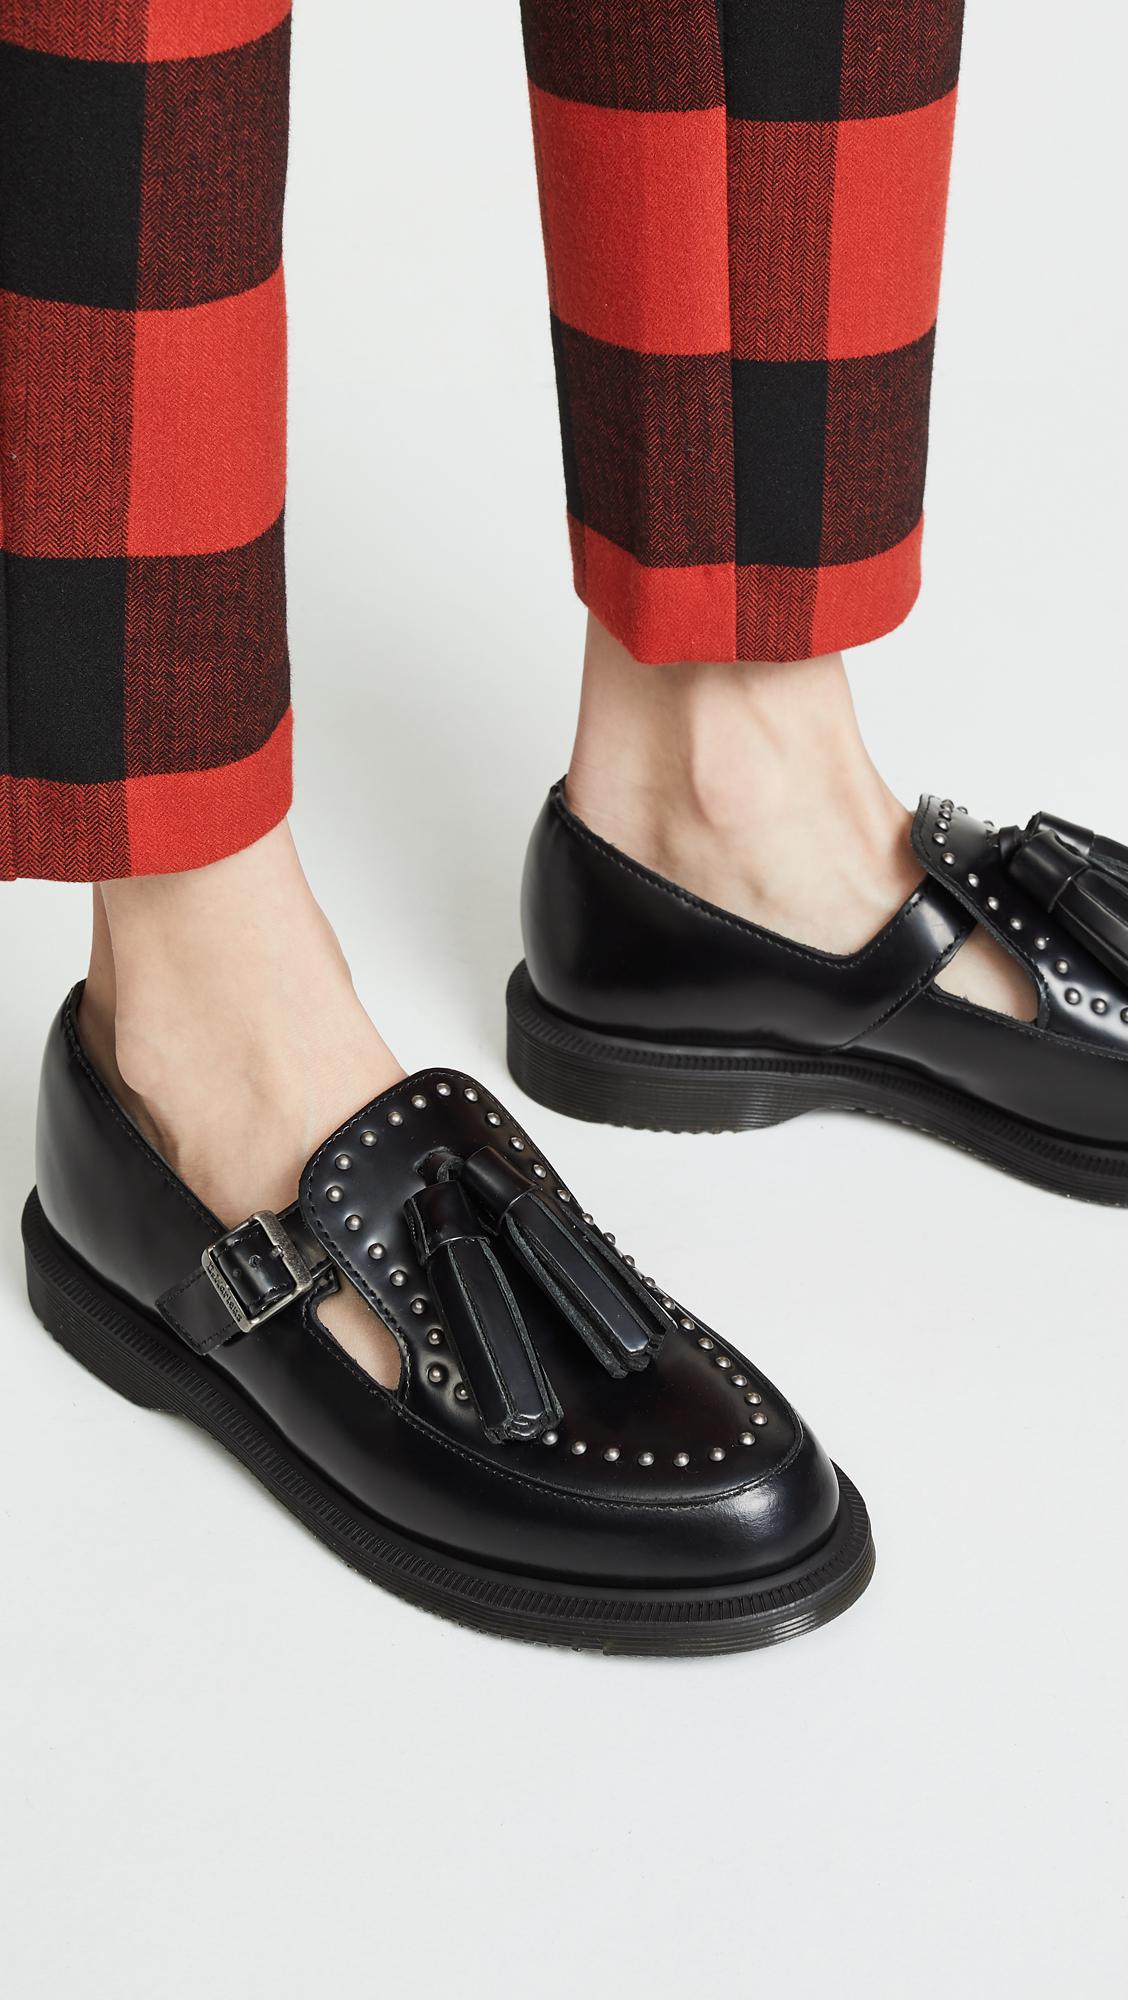 Dr. Martens Leather Gracia Stud Mary Jane Shoes in Black | Lyst